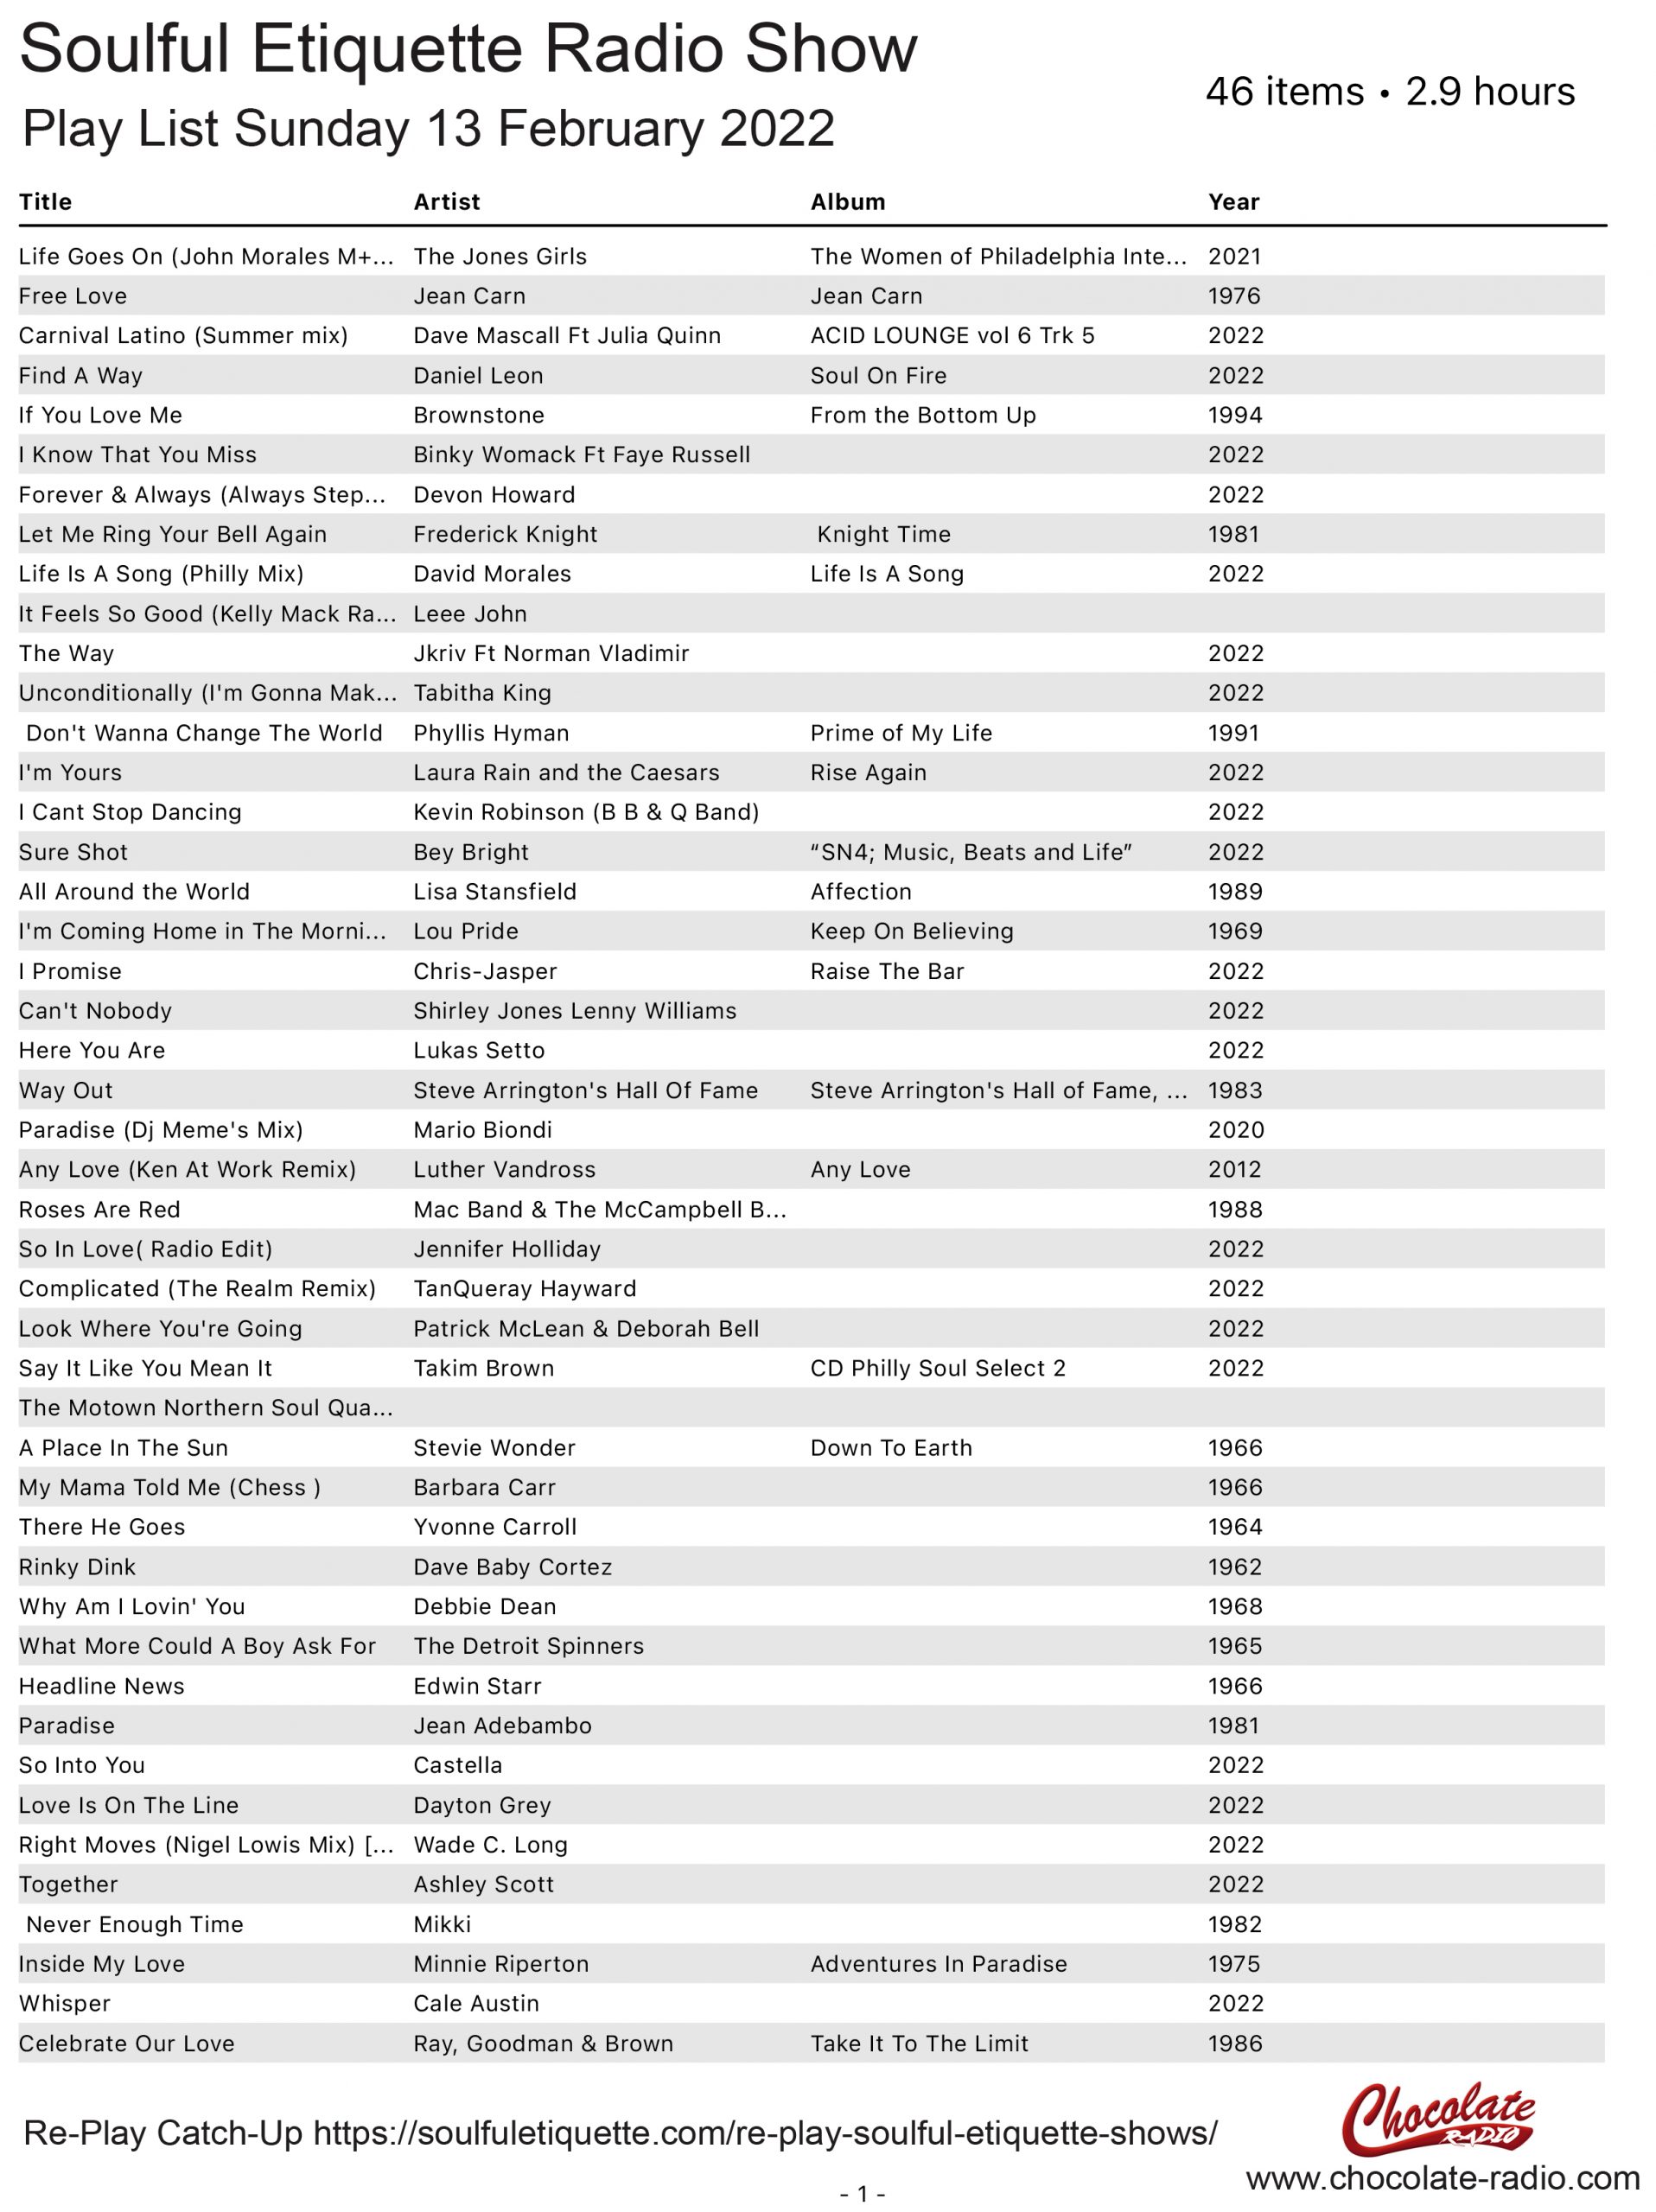 Play List For The Soulful Etiquette Soul Radio Show 13-Feb-2022